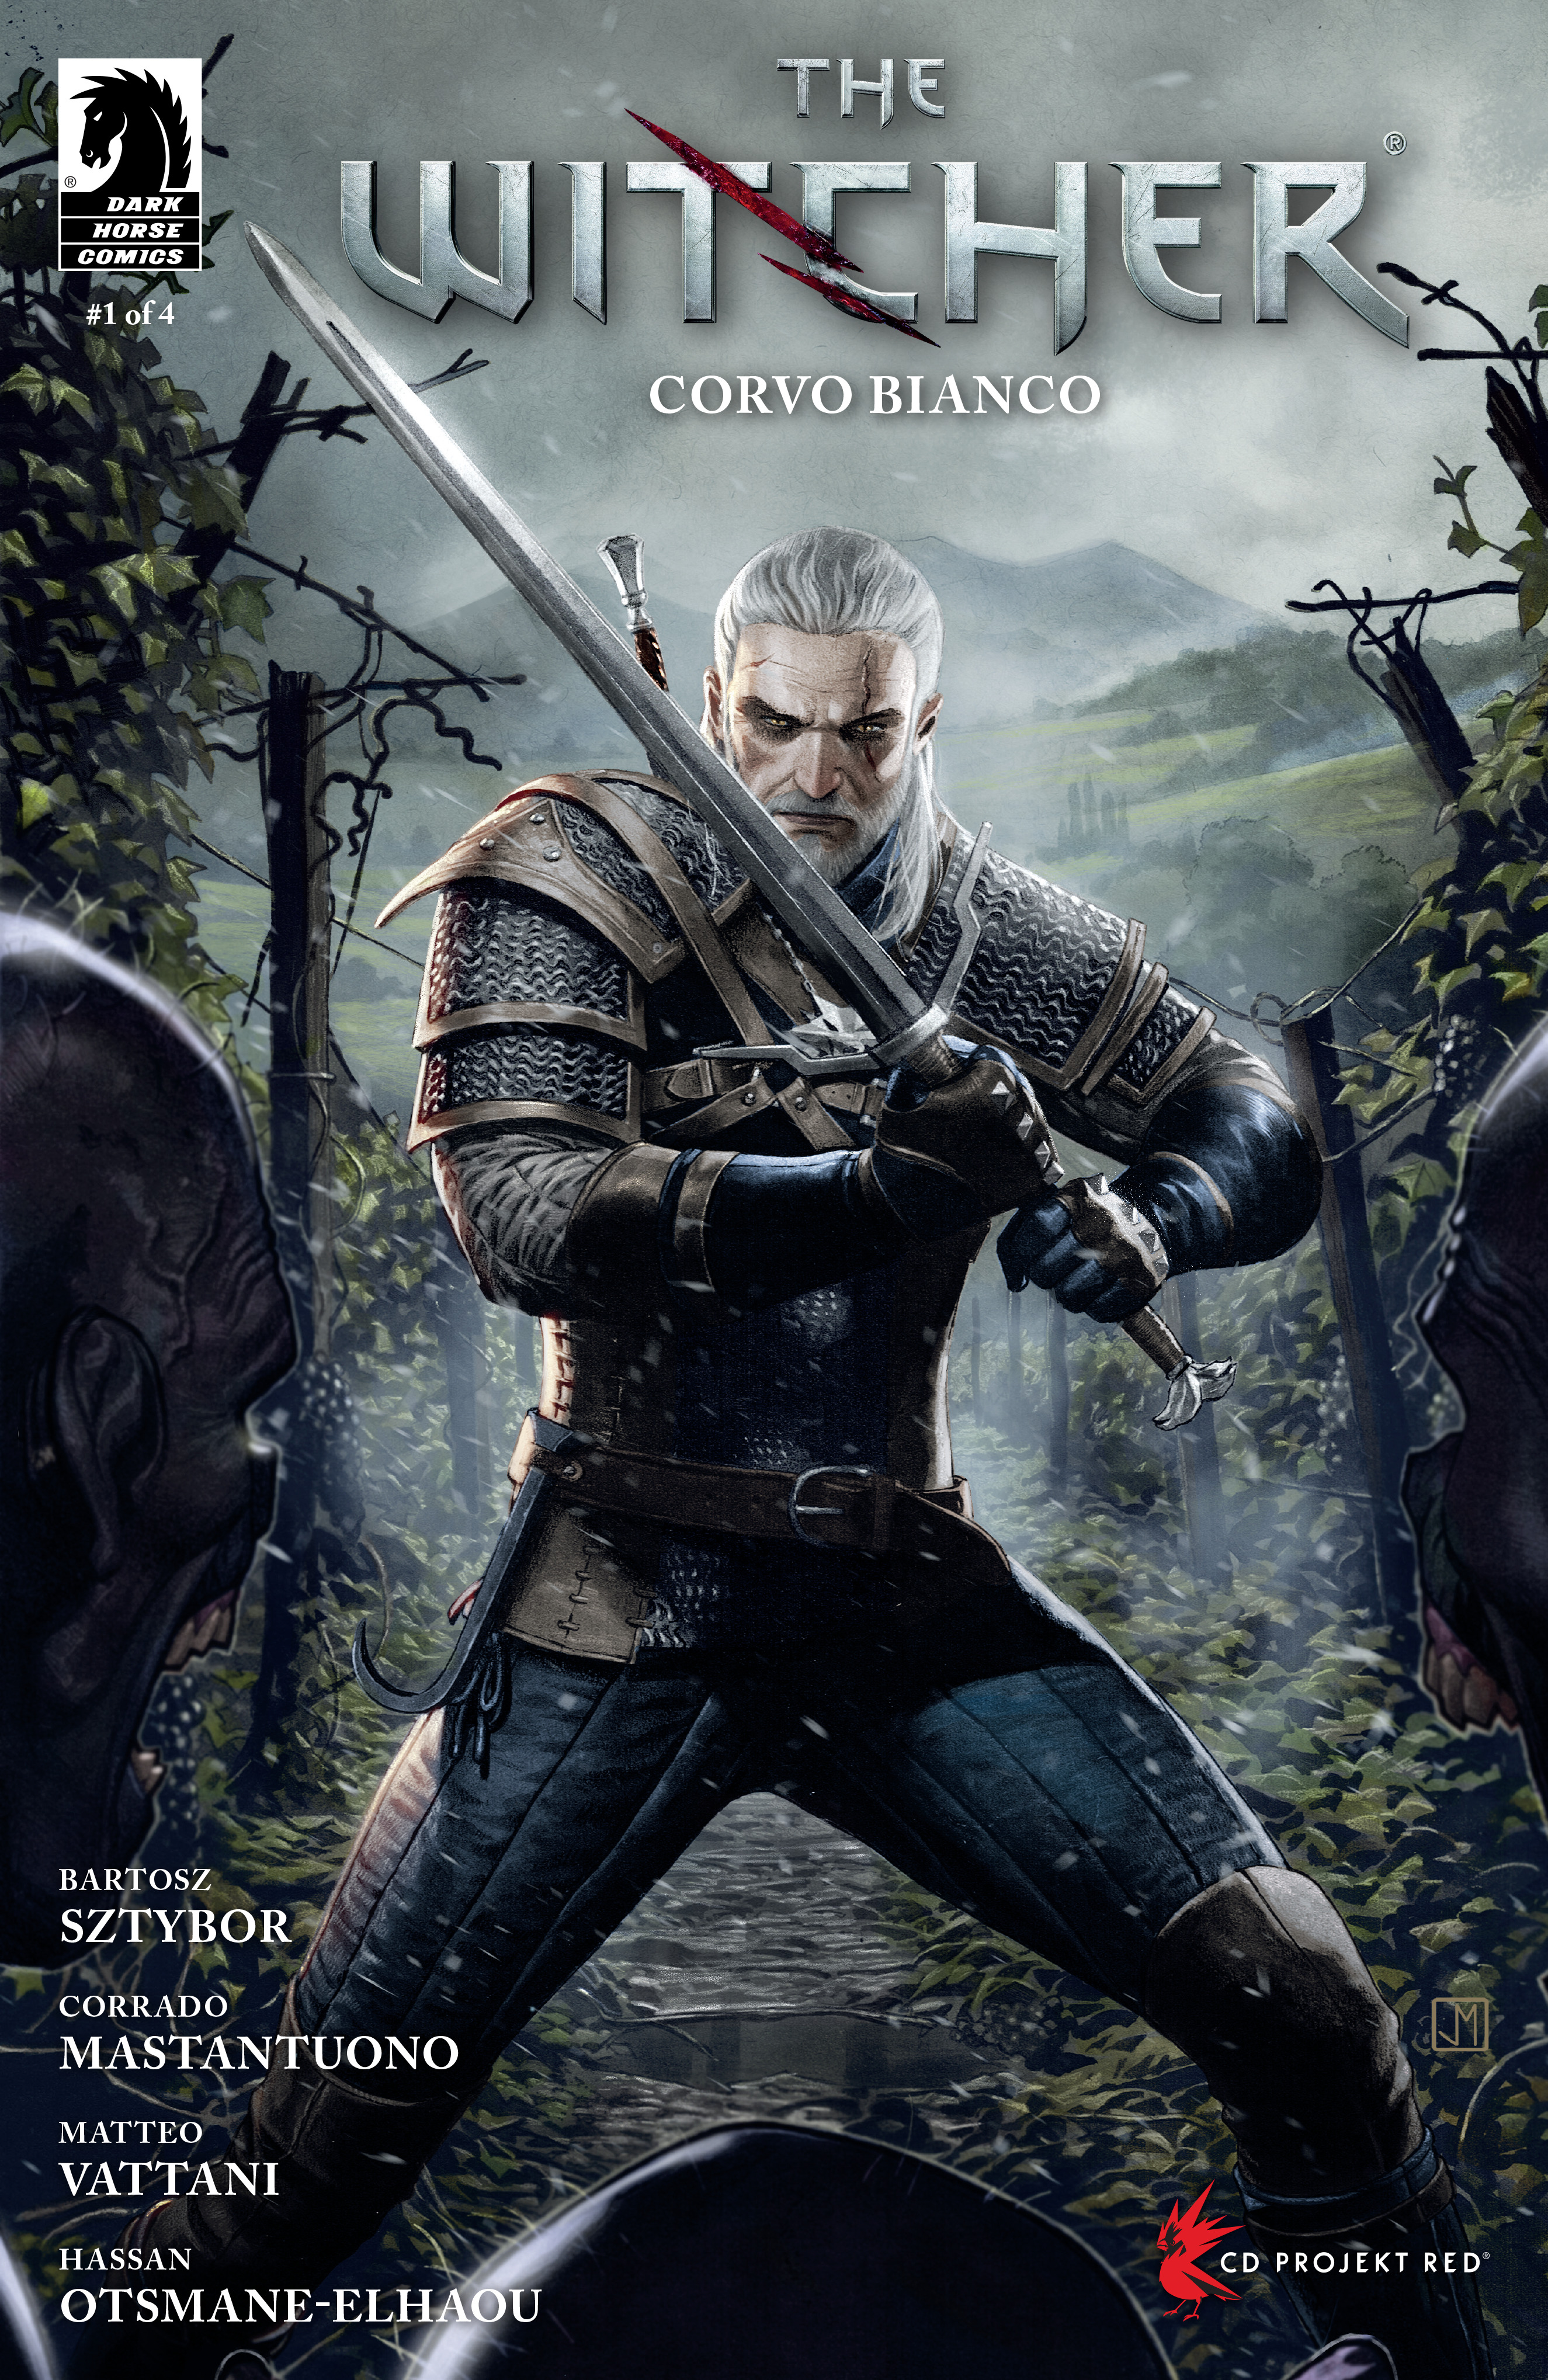 The Witcher: Corvo Bianco issue 1 cover art